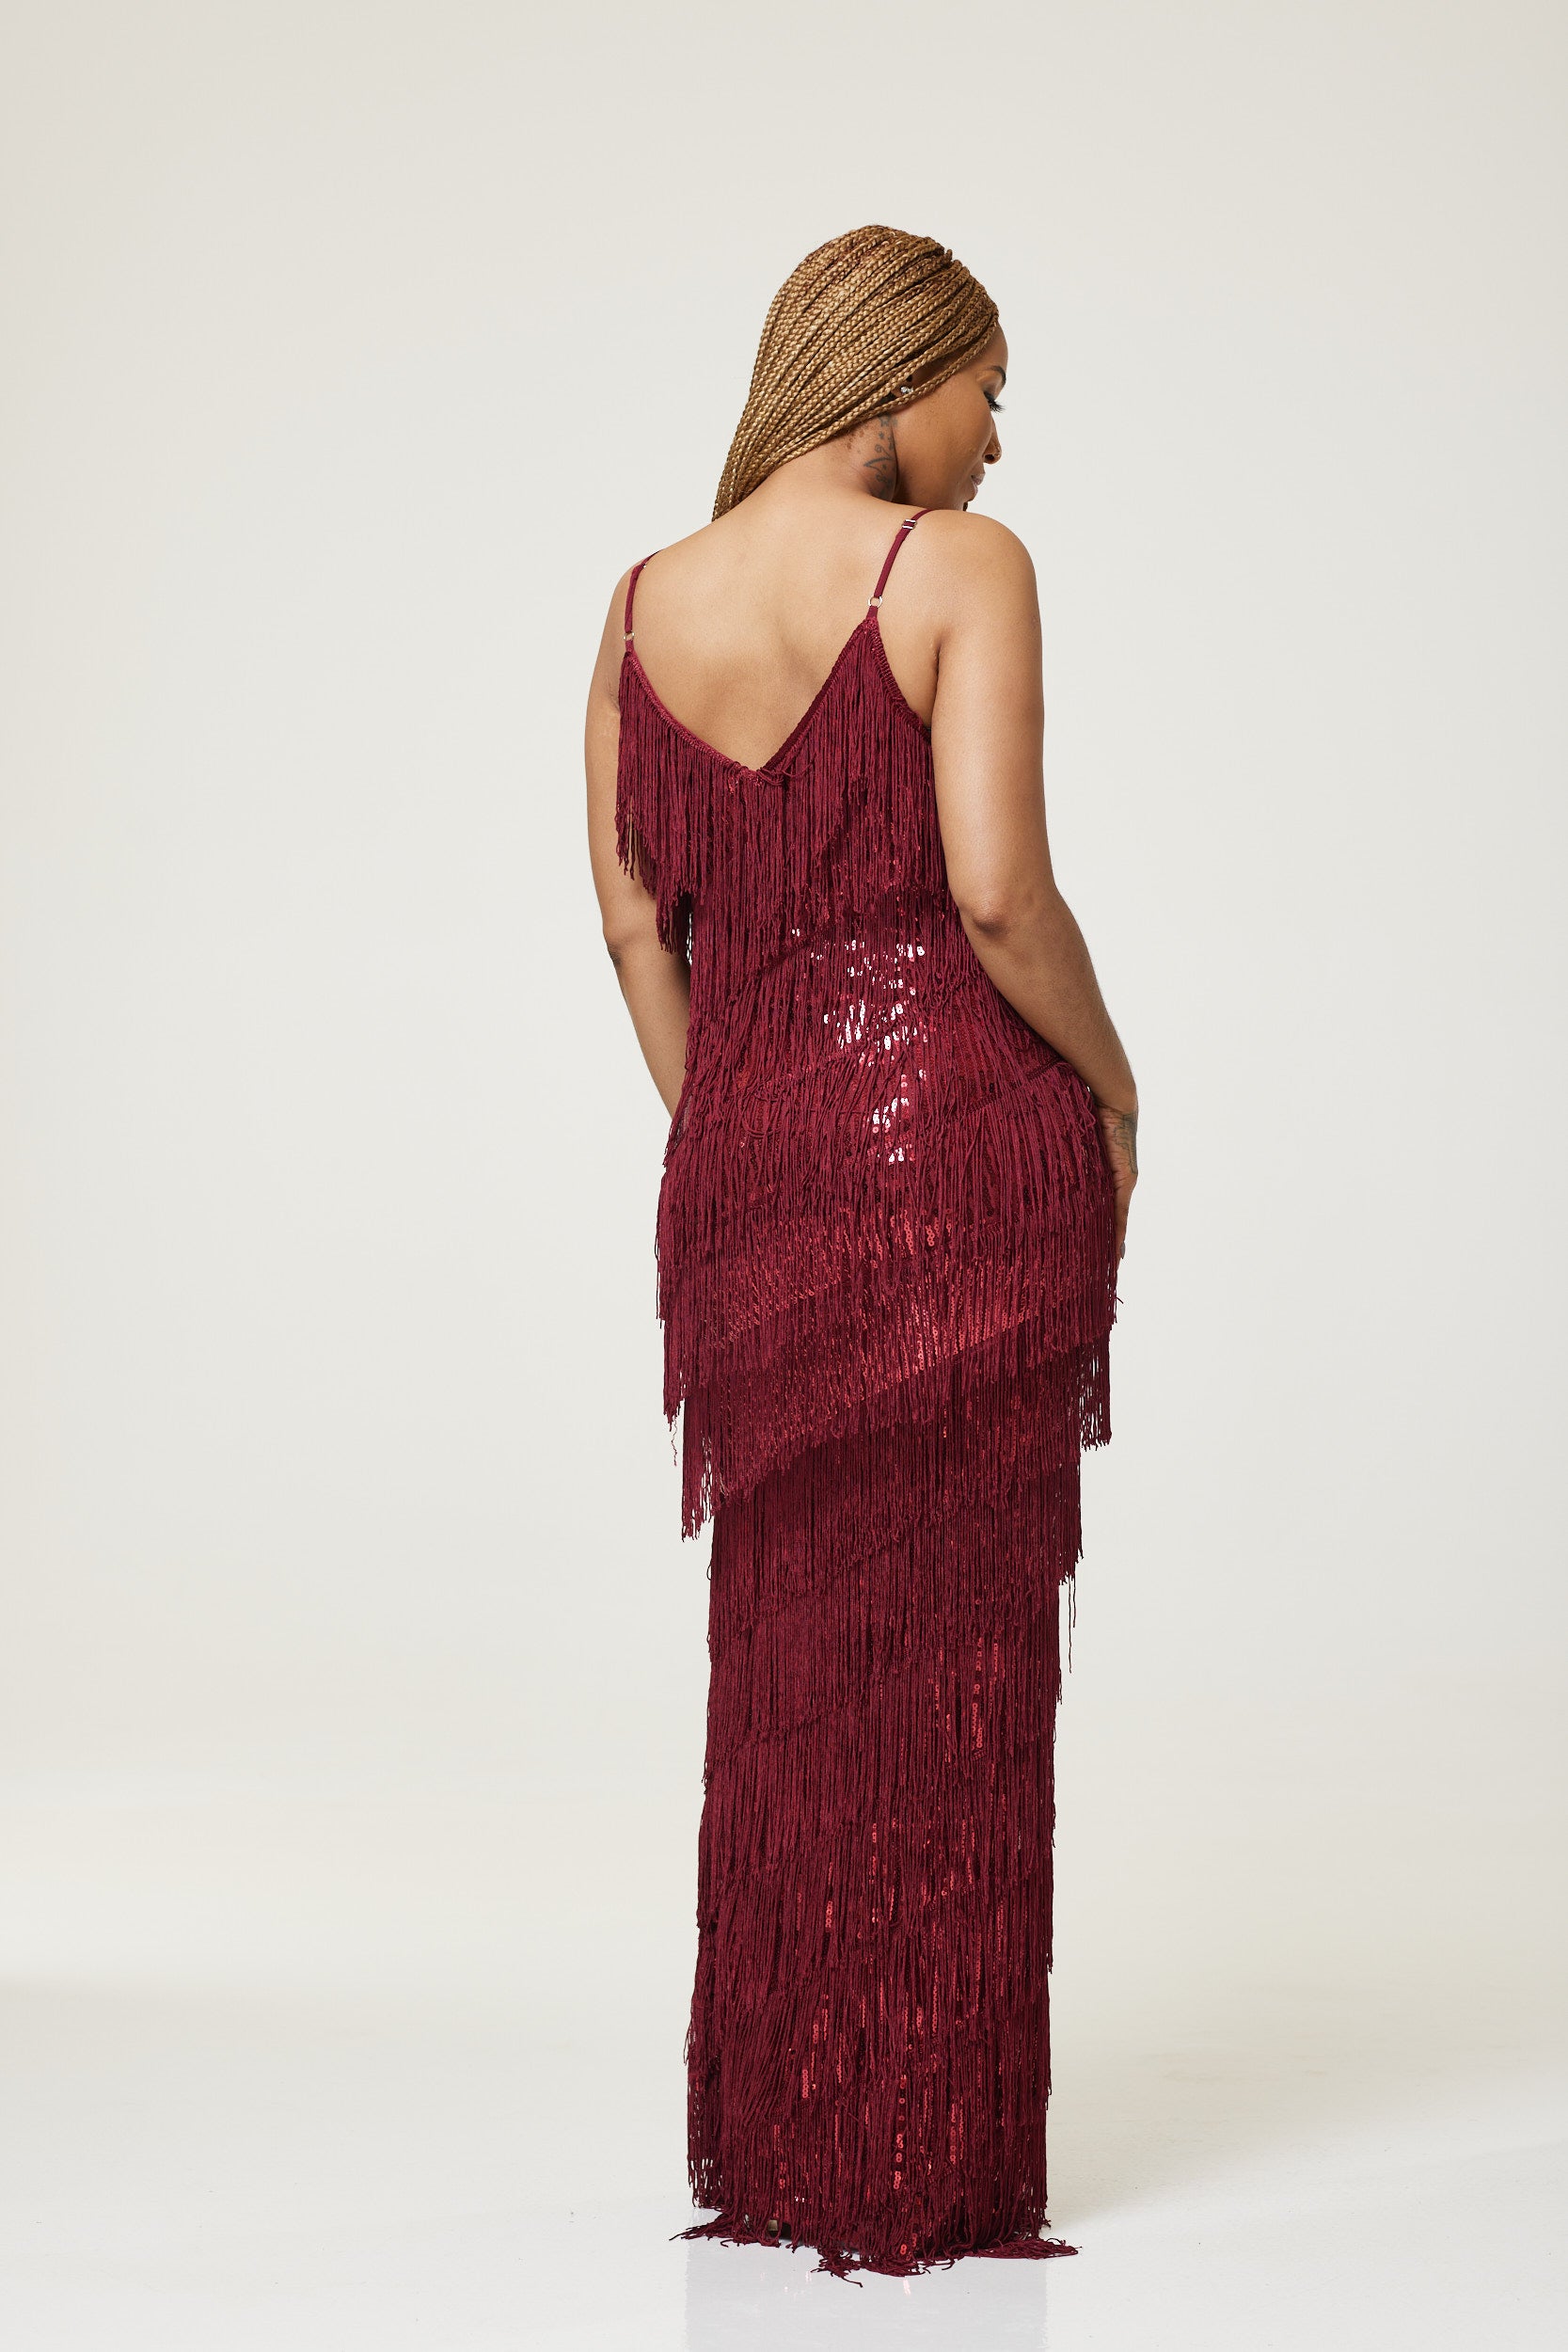 Melissa Party Dress With Sequin Tassle - Small (UK 8-10) / Red - MLH Online